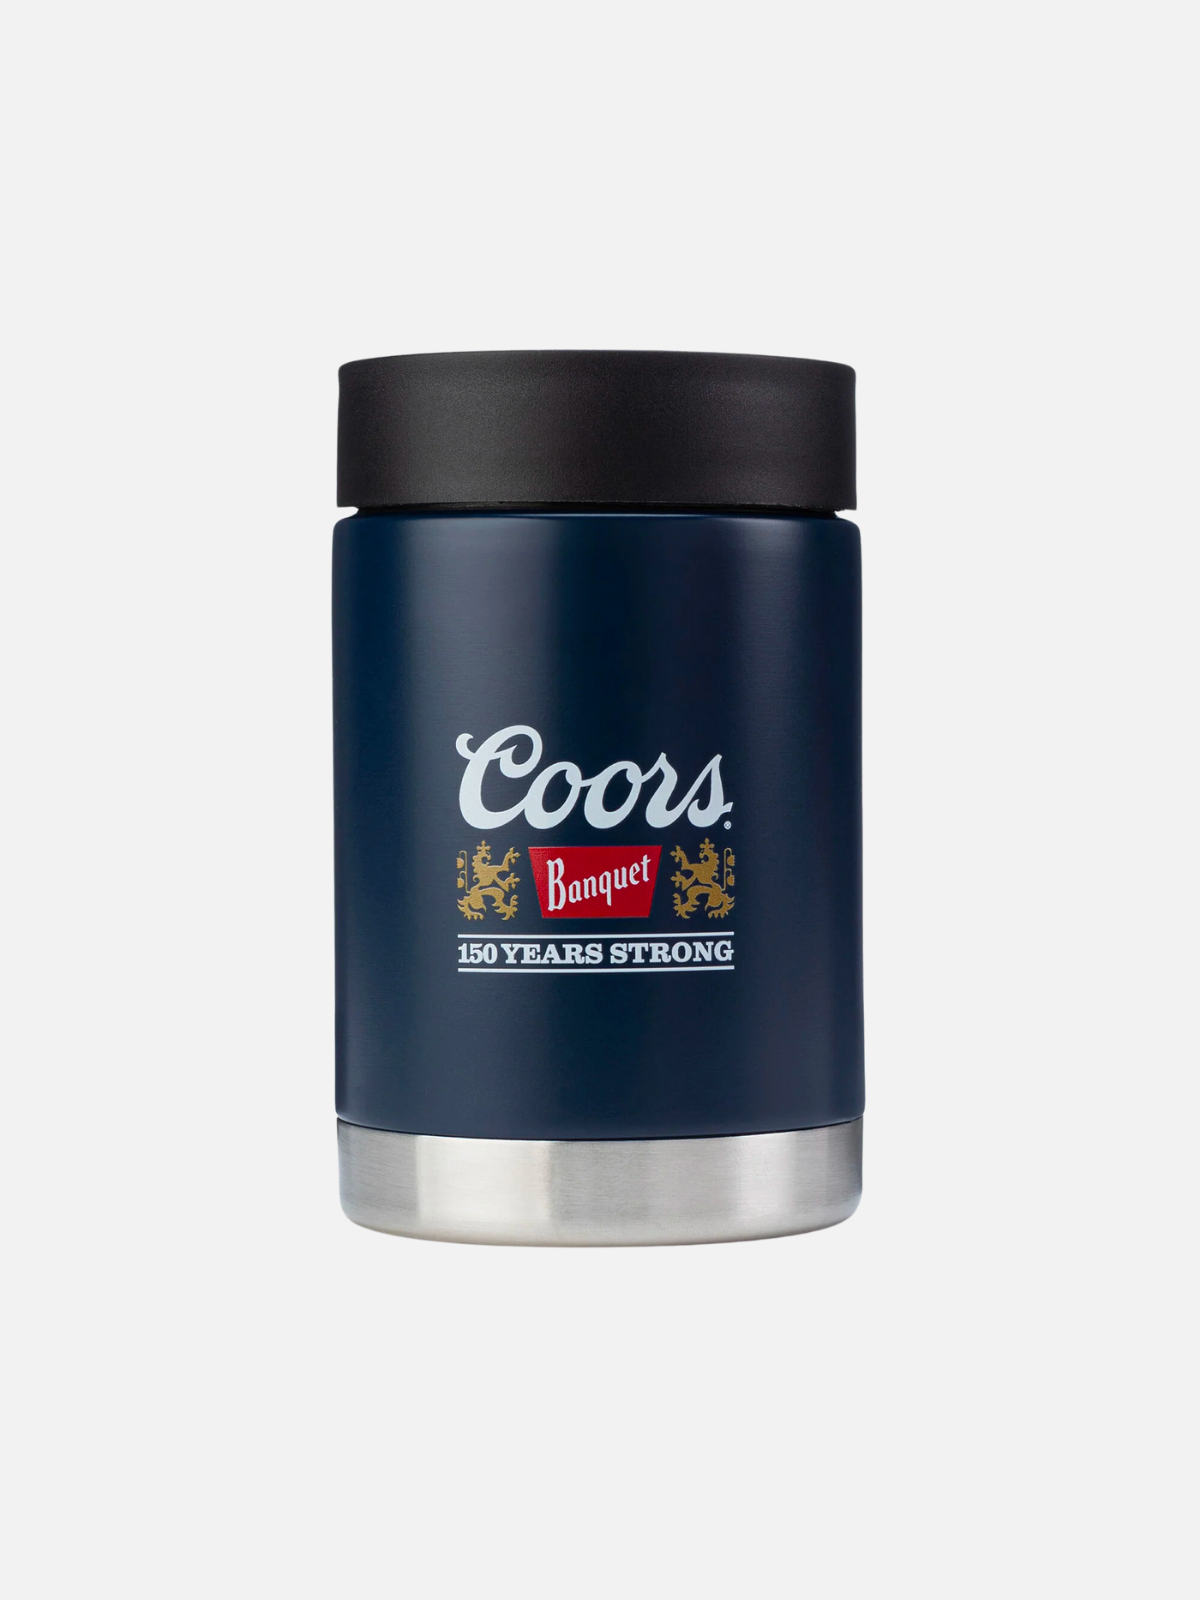 seager coors banquet beer collaboration celebrating 150 years of the brand can armor metal koozie beer can insulator navy blue kempt athens ga georgia men's clothing store